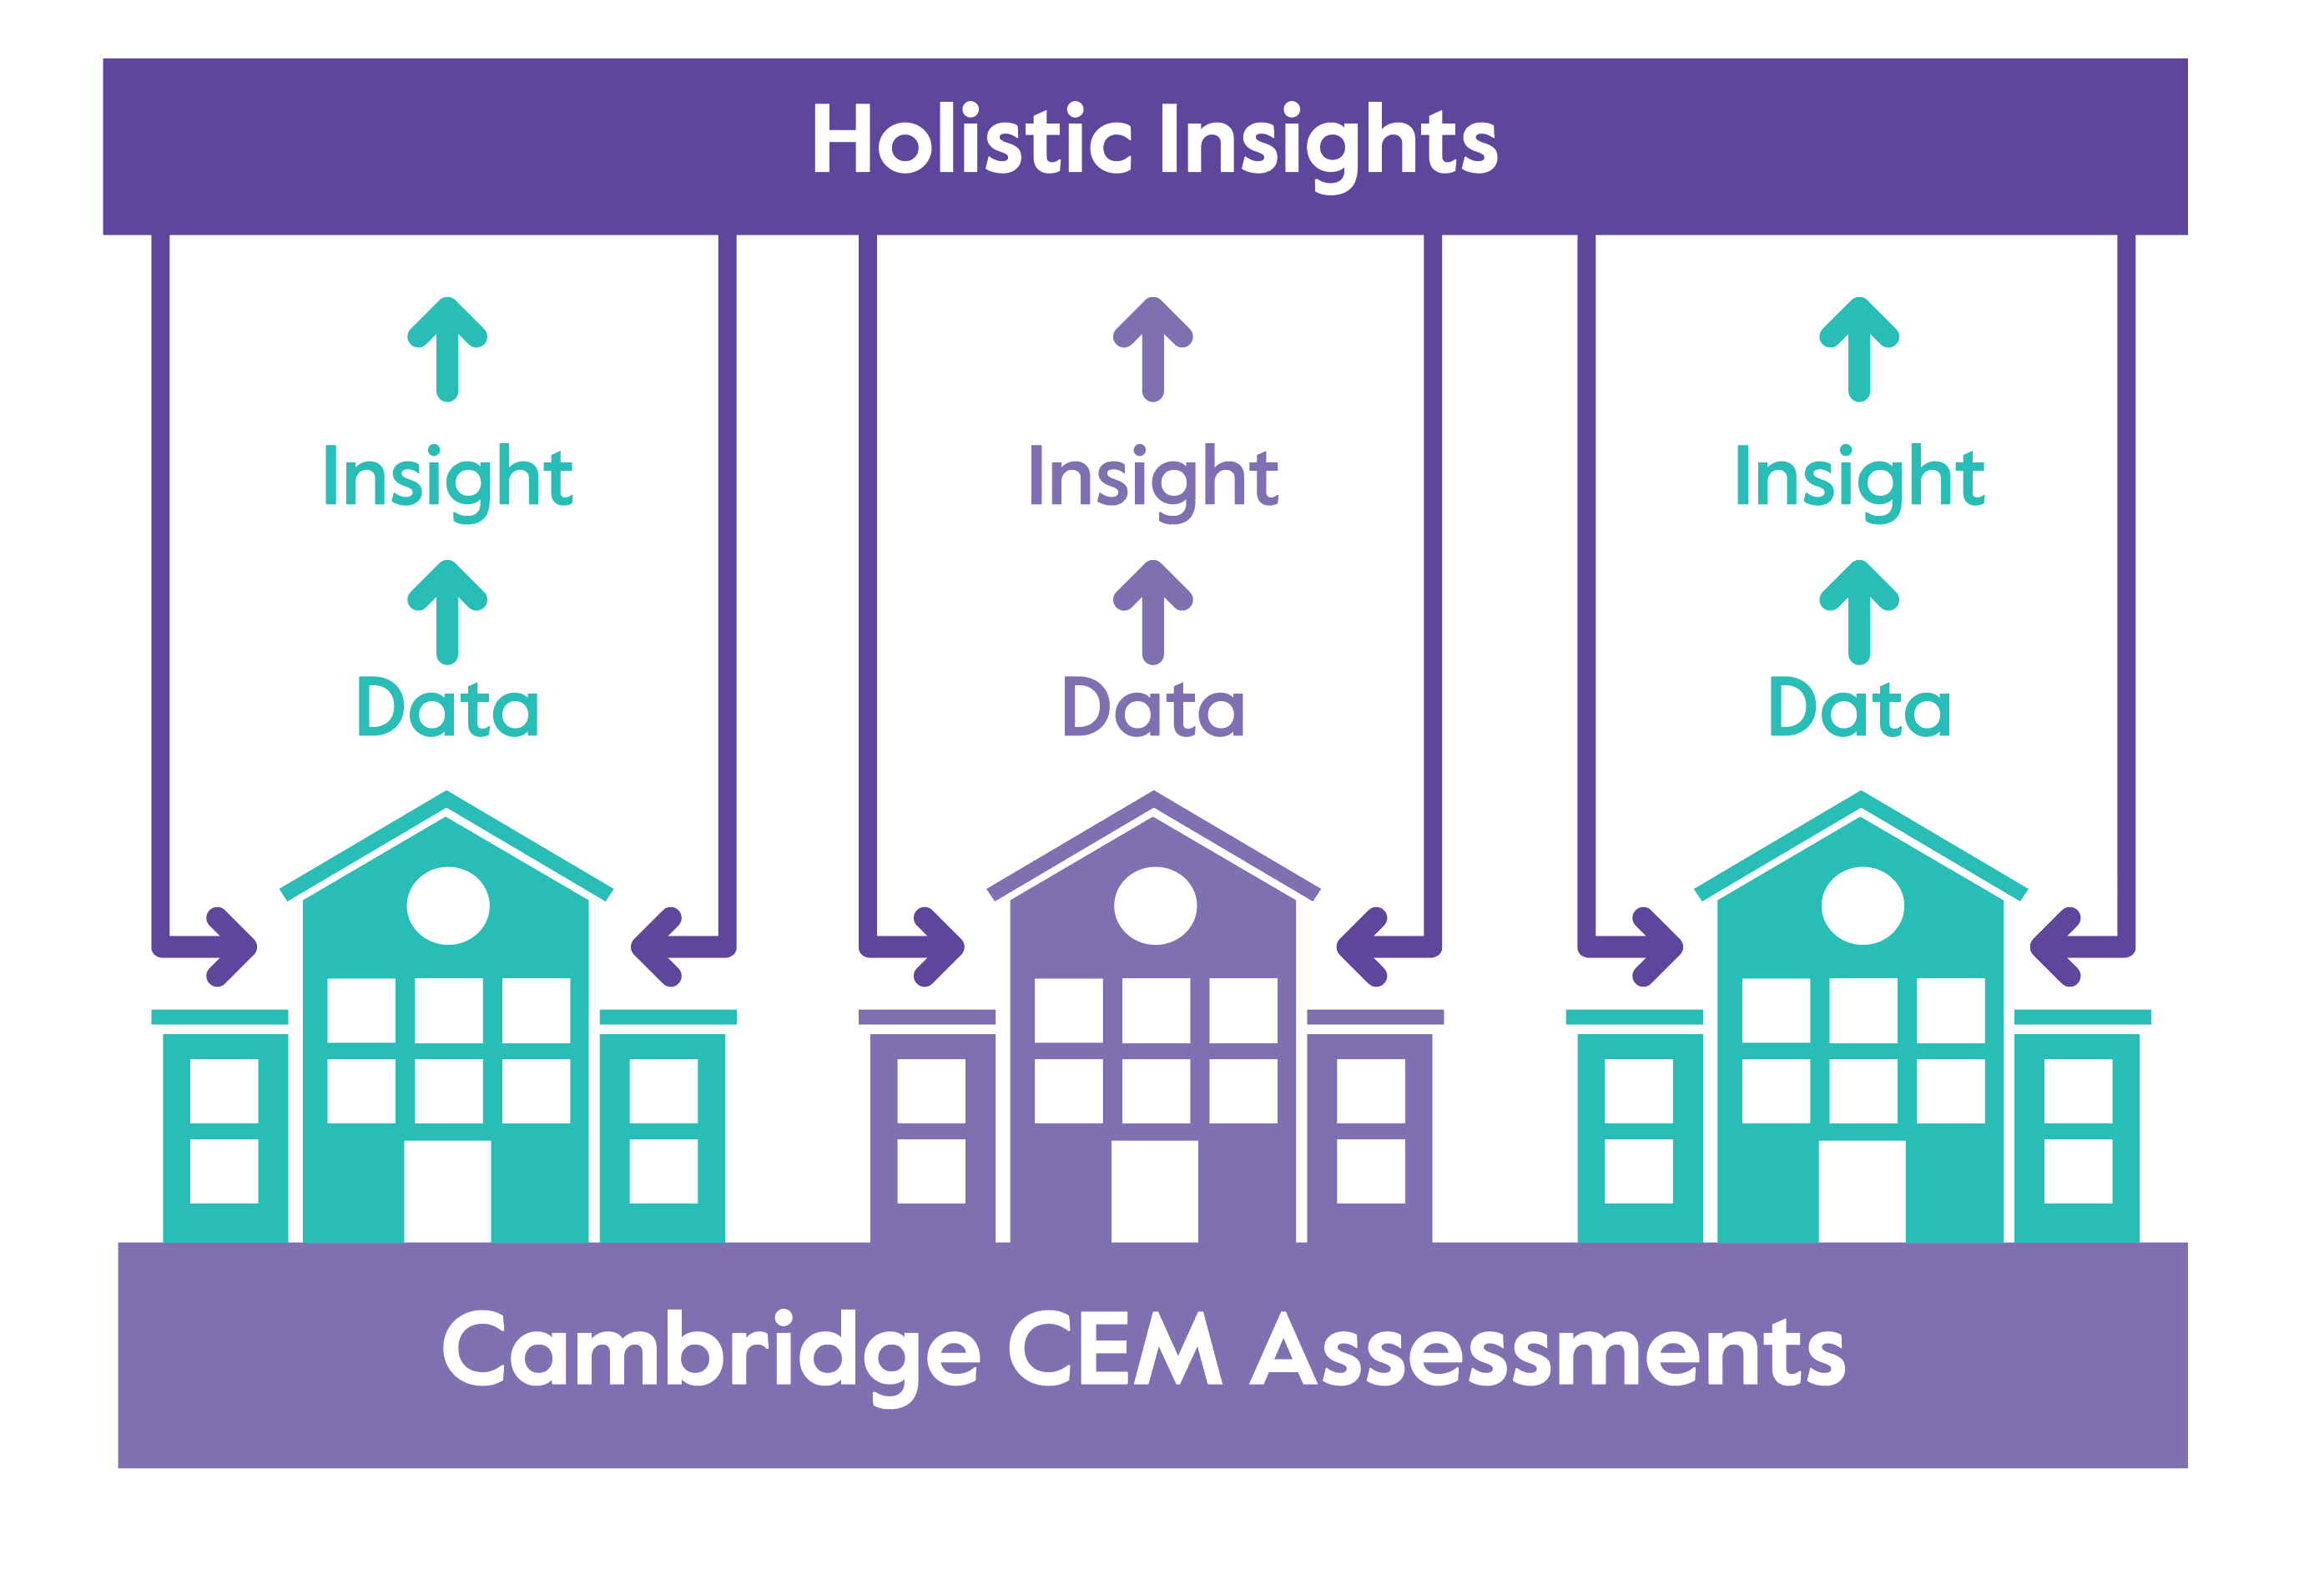 Data and Insight to Holistic Insights using Cambridge CEM